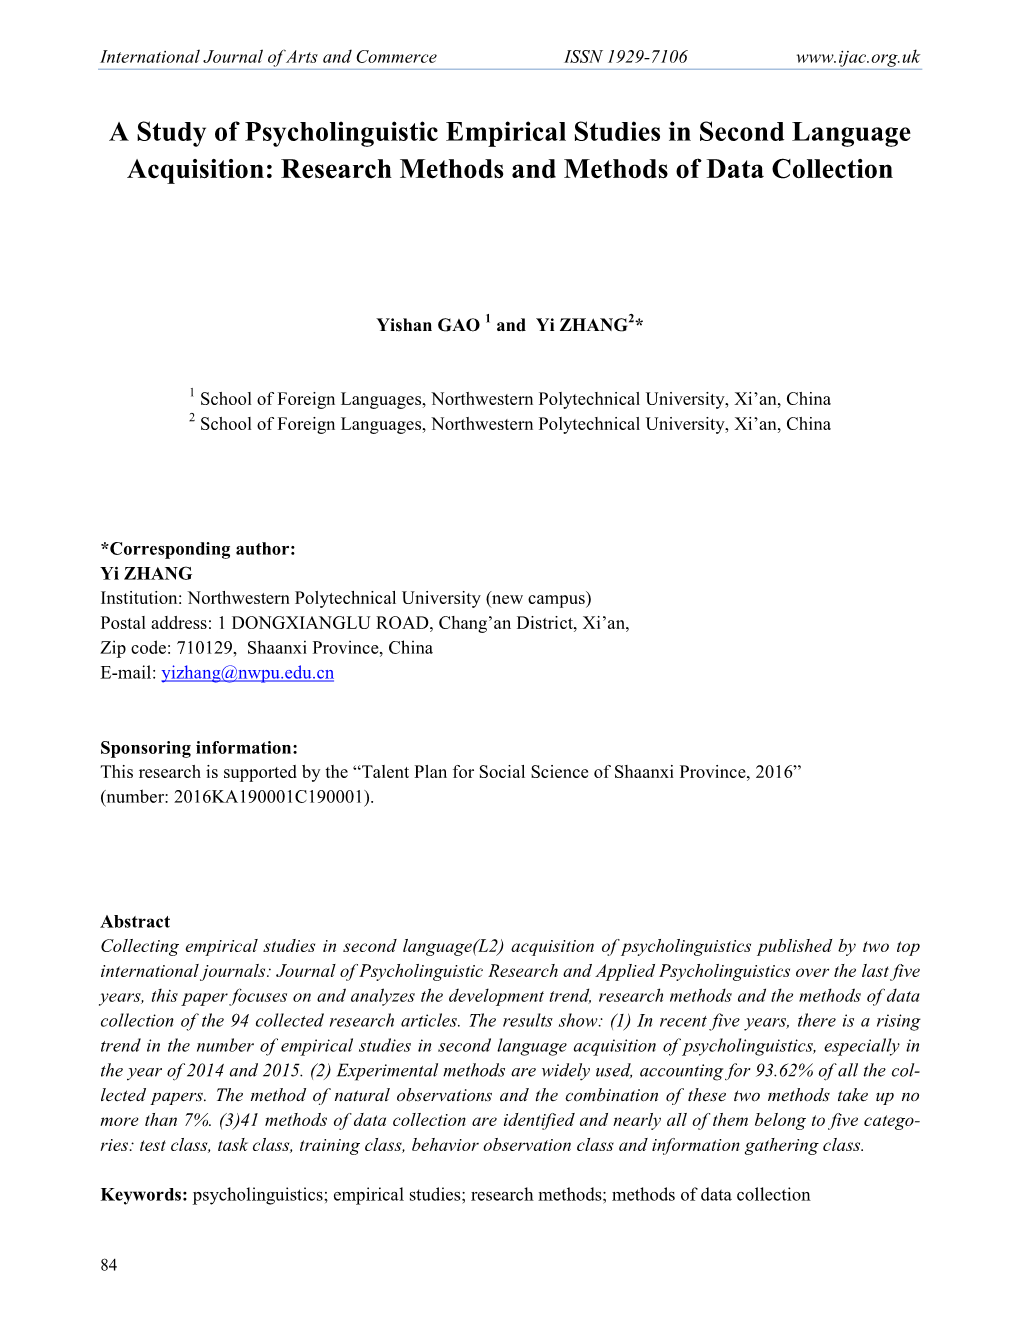 A Study of Psycholinguistic Empirical Studies in Second Language Acquisition: Research Methods and Methods of Data Collection